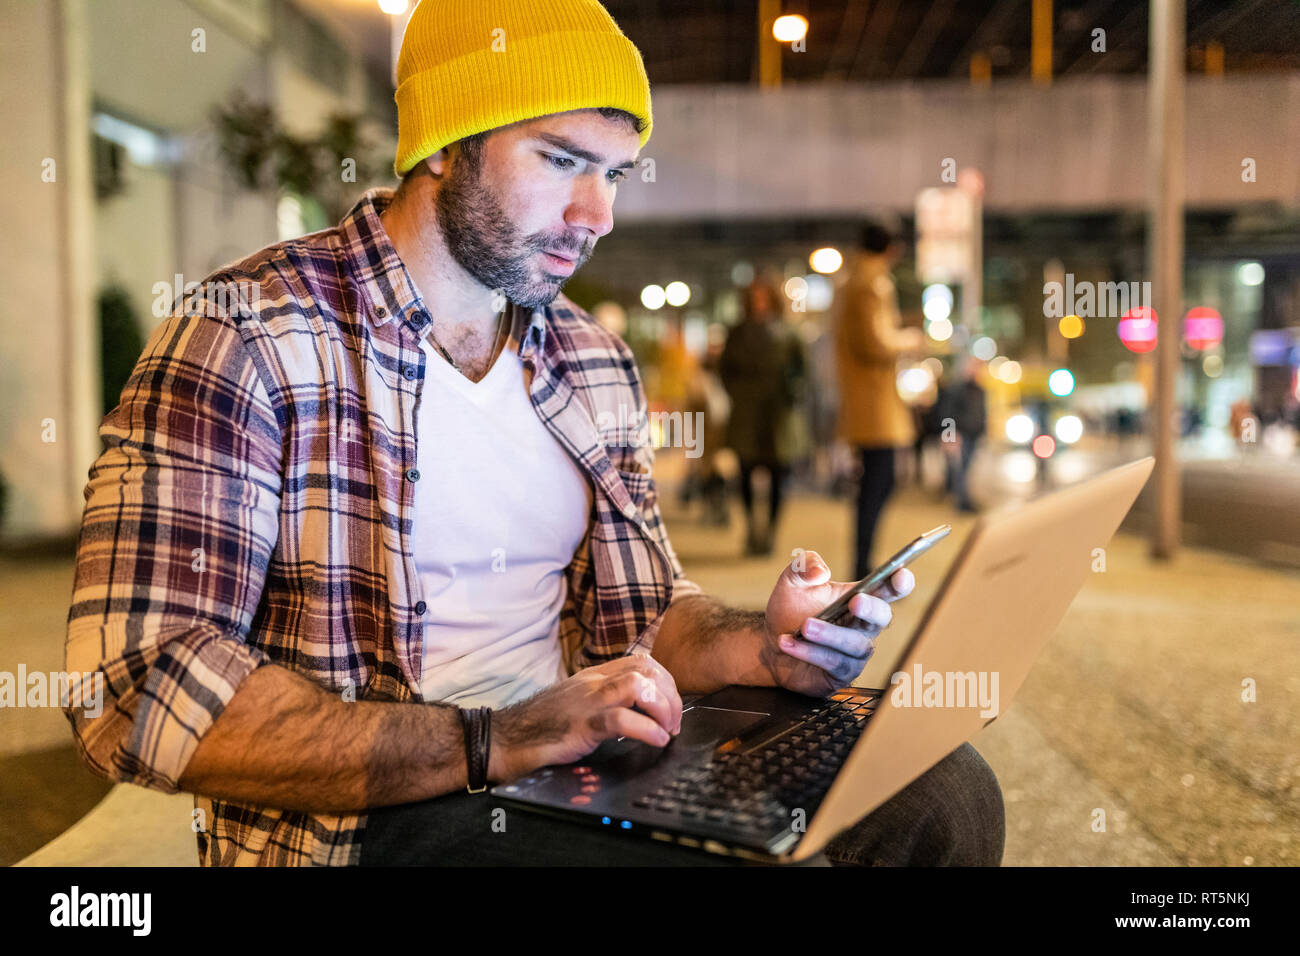 UK, London, man using phone and laptop out in the city at night Stock Photo